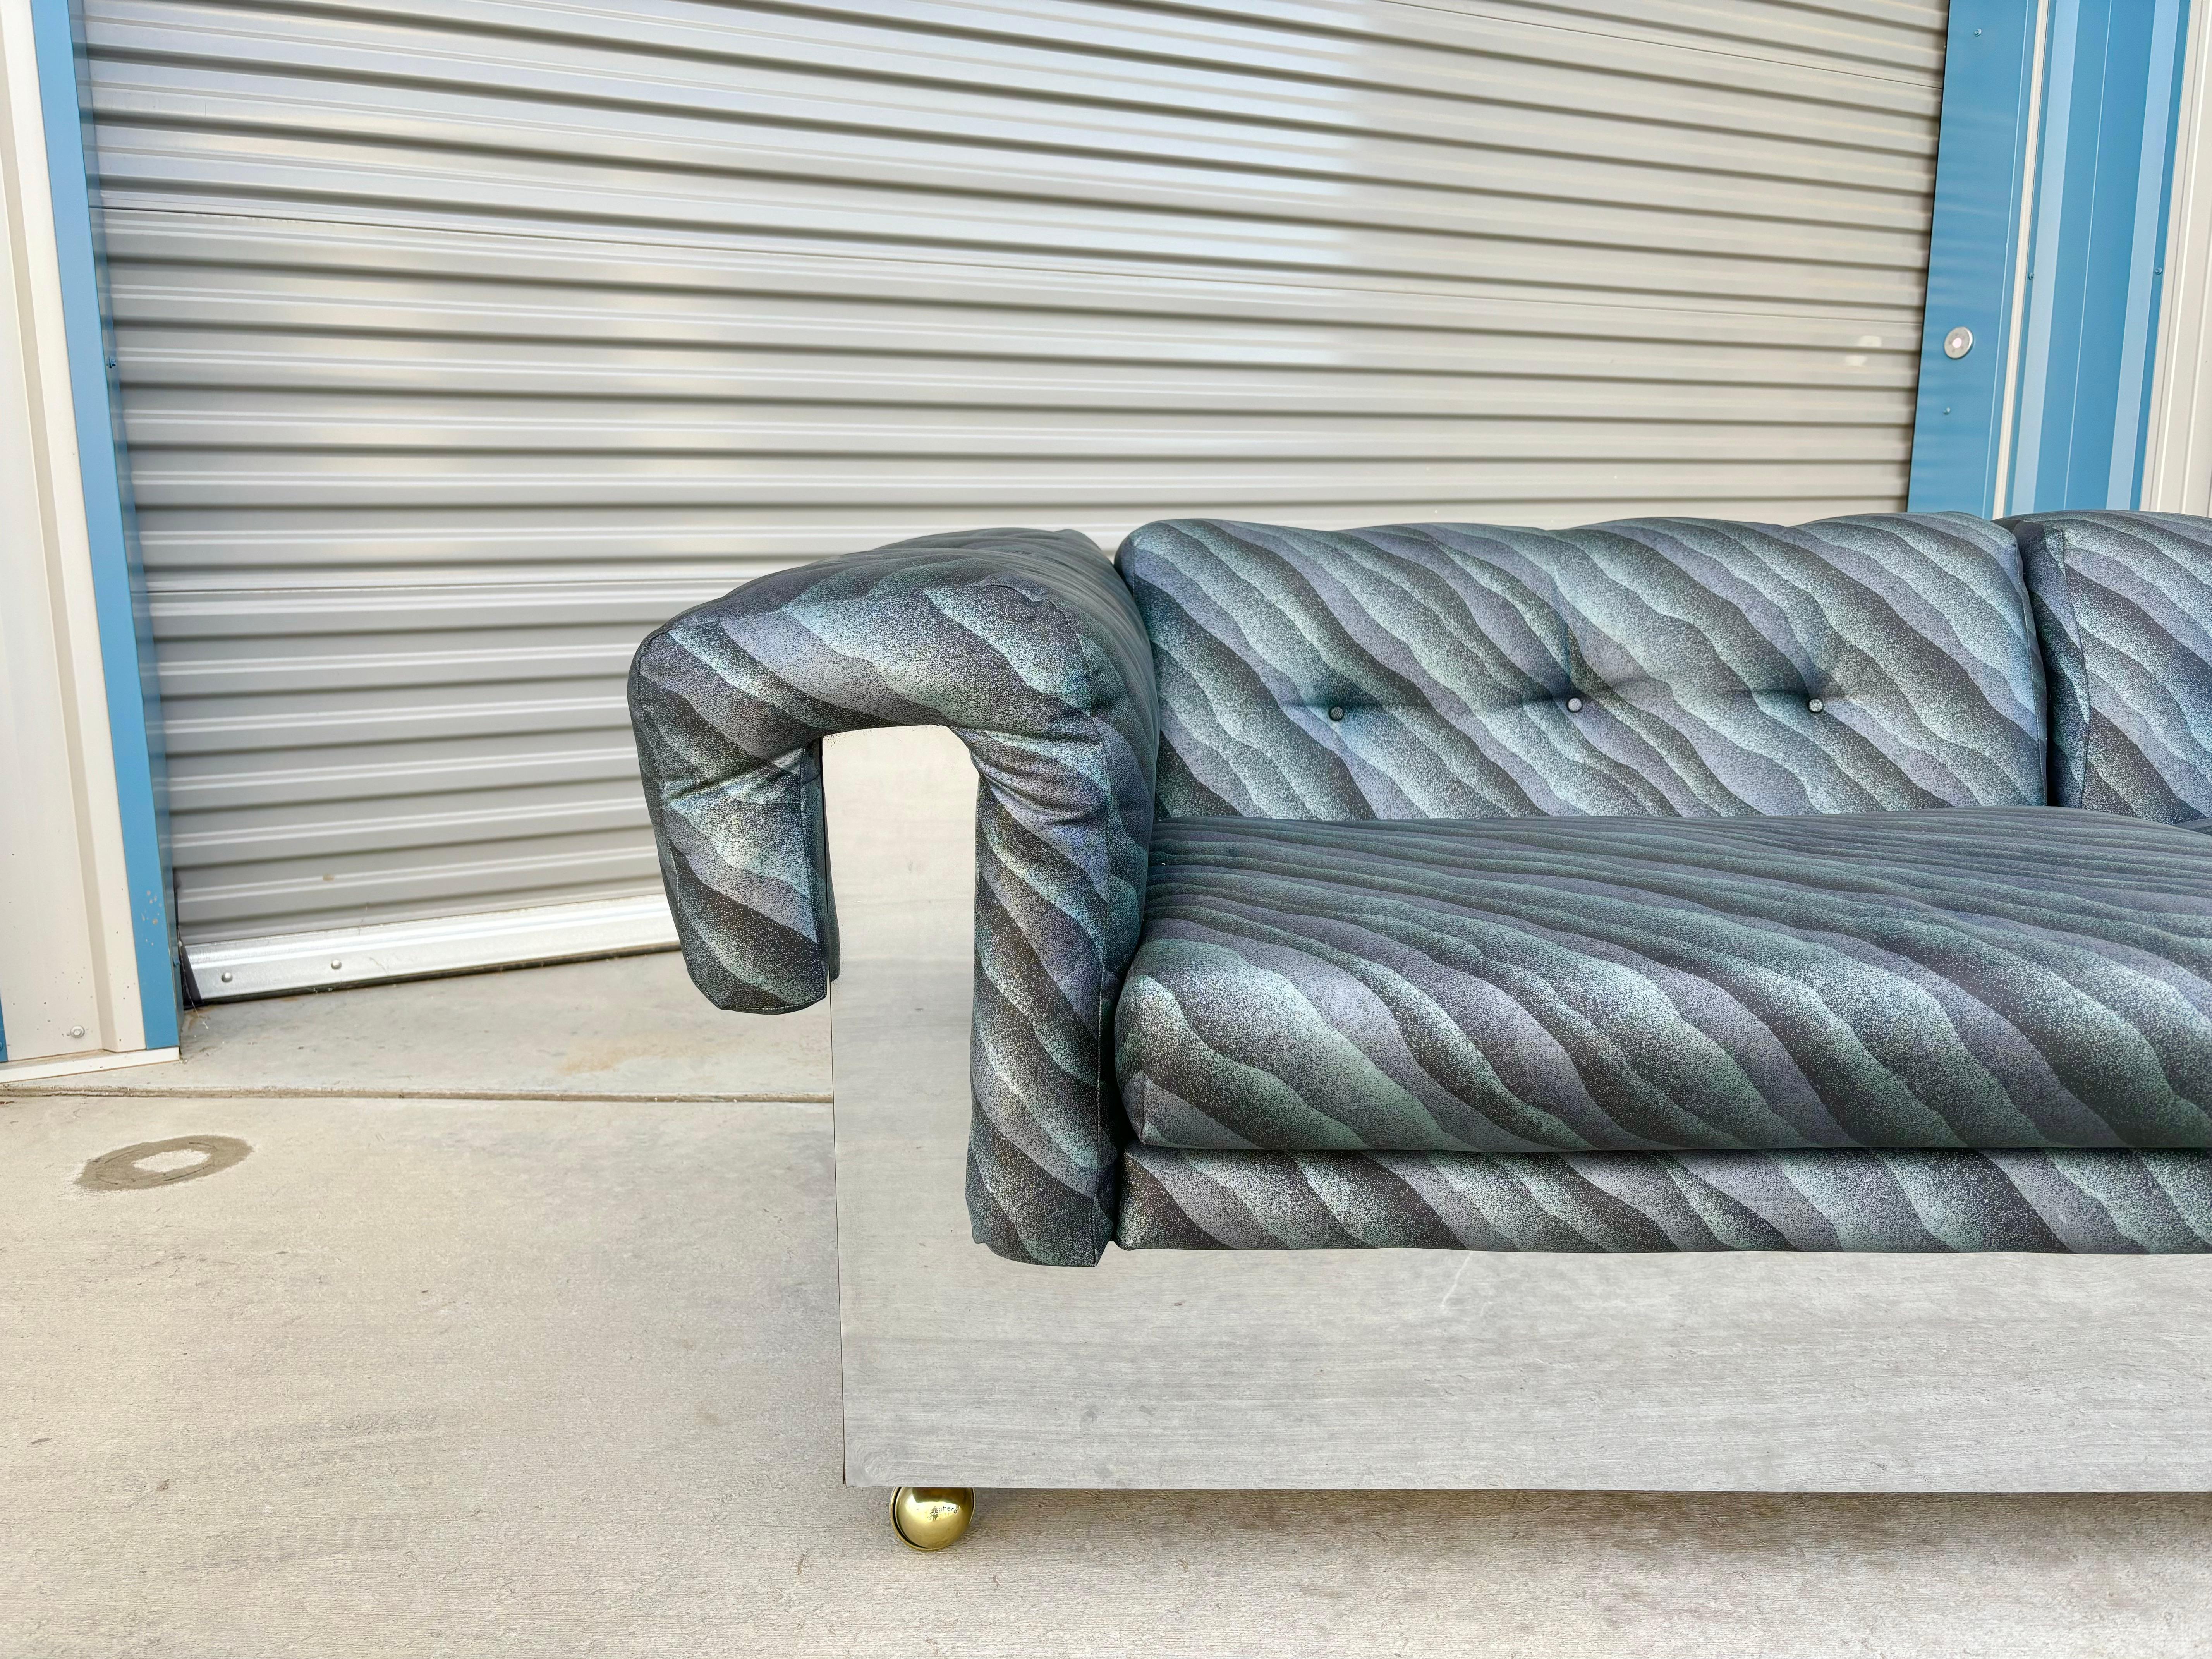 This Mid-century chrome sofa was designed by Milo Baughman in the United States circa 1970s. Its sleek and elegant wrap-around chrome frame and minimalist design will add a touch of sophistication to any living space. The sofa's mobility is enhanced